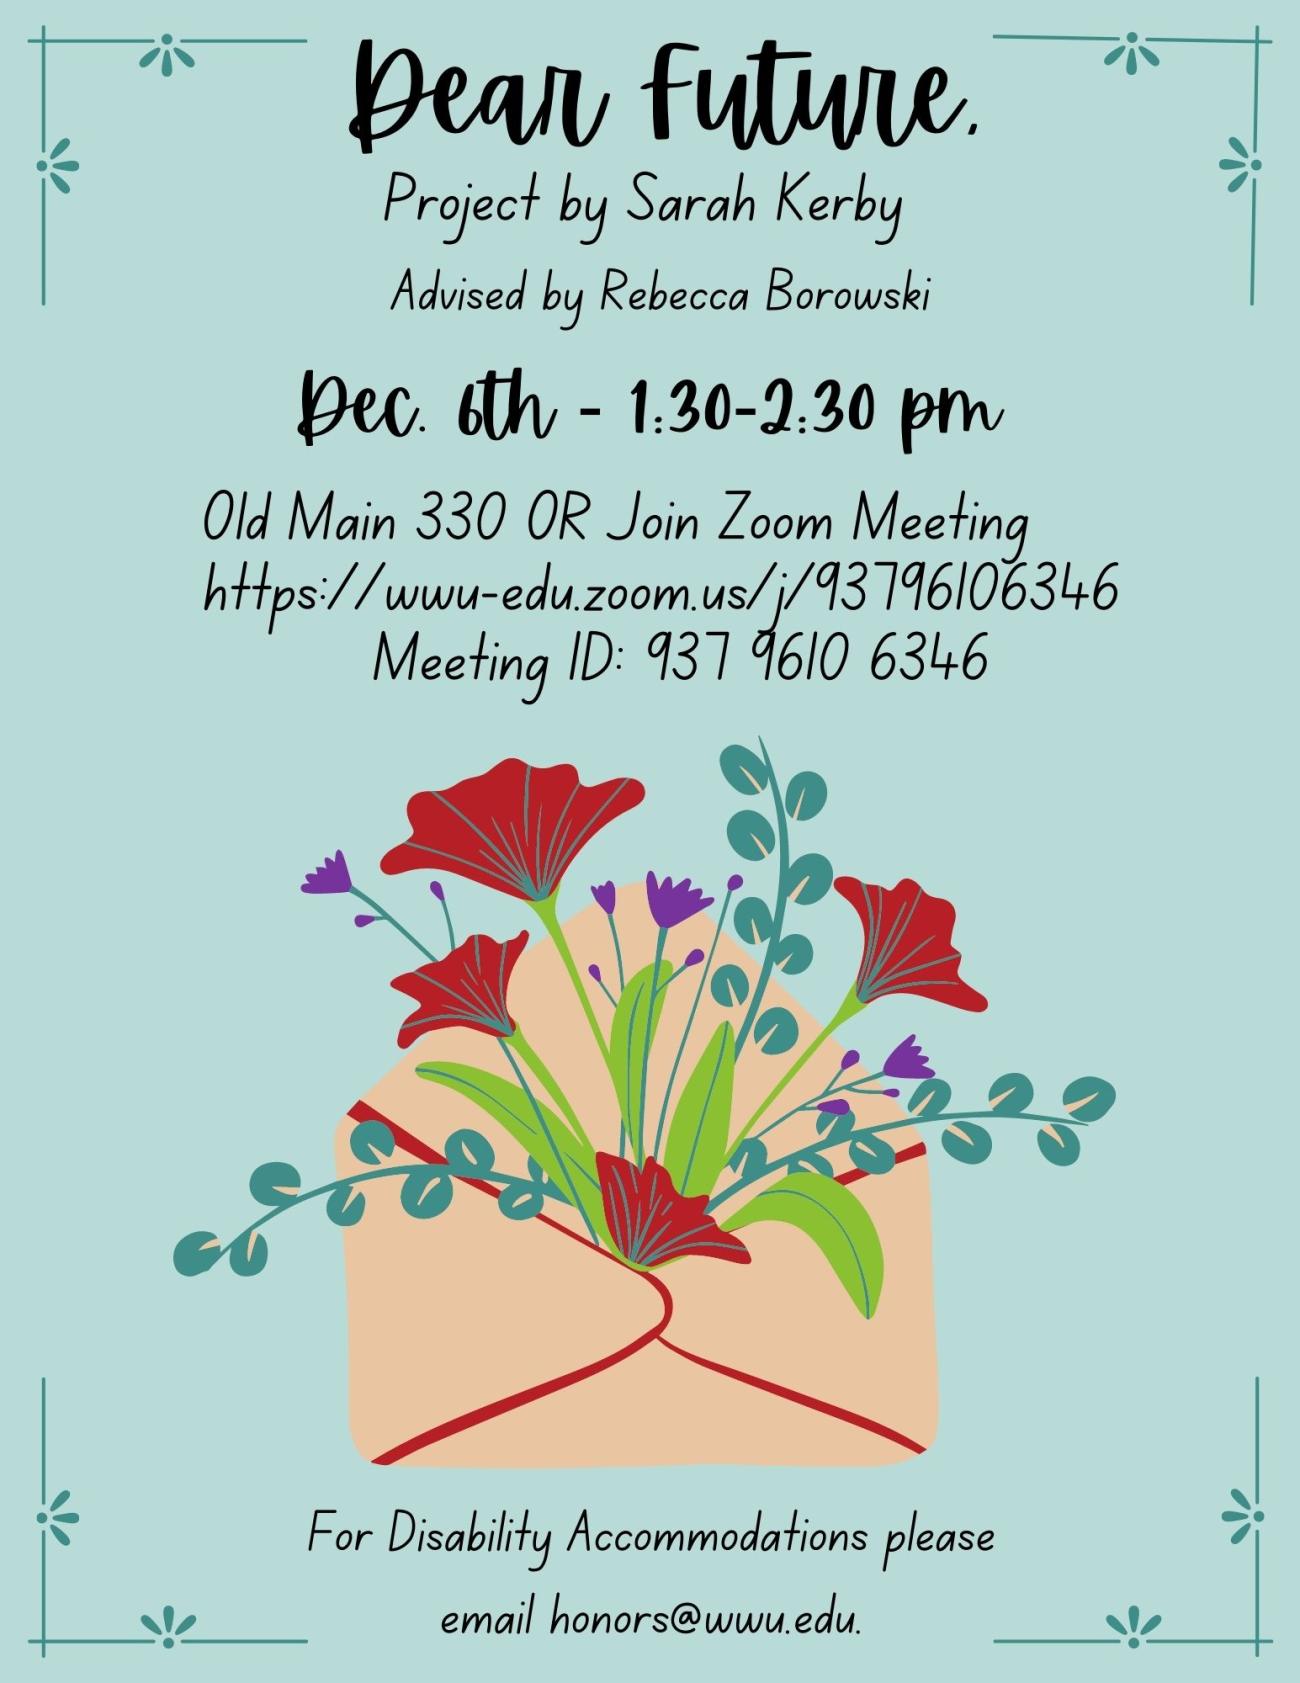 A poster with an envelope that has flowers coming out of it. The text reads: "Dear future. Project by Sarah Kerby. Advised by Rebecca Borowski. December 6th at 1:30-2:30 pm. Old Main 330 OR Join Zoom Meeting https://wwu-edu.zoom.us/j/93796106346 Meeting ID: 937 9610 6346. For disability accommodations please email honors@wwu.edu"